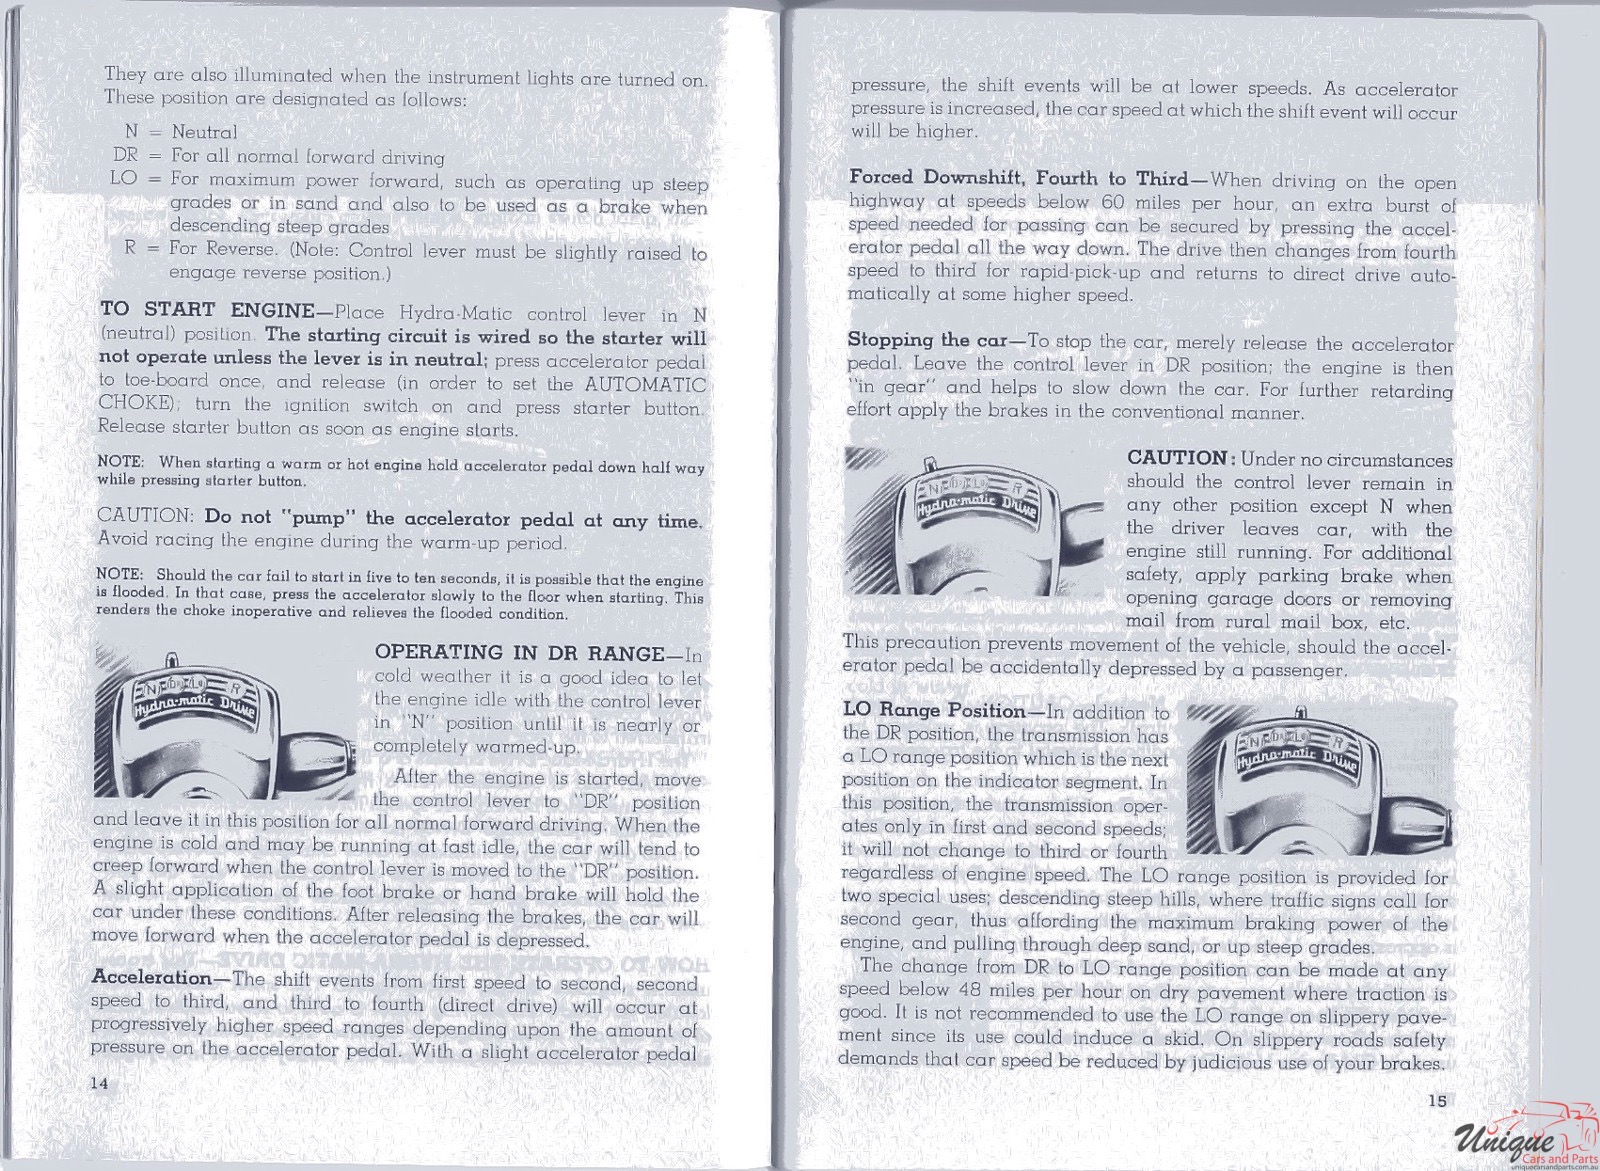 1950 Pontiac Owners Manual Page 3